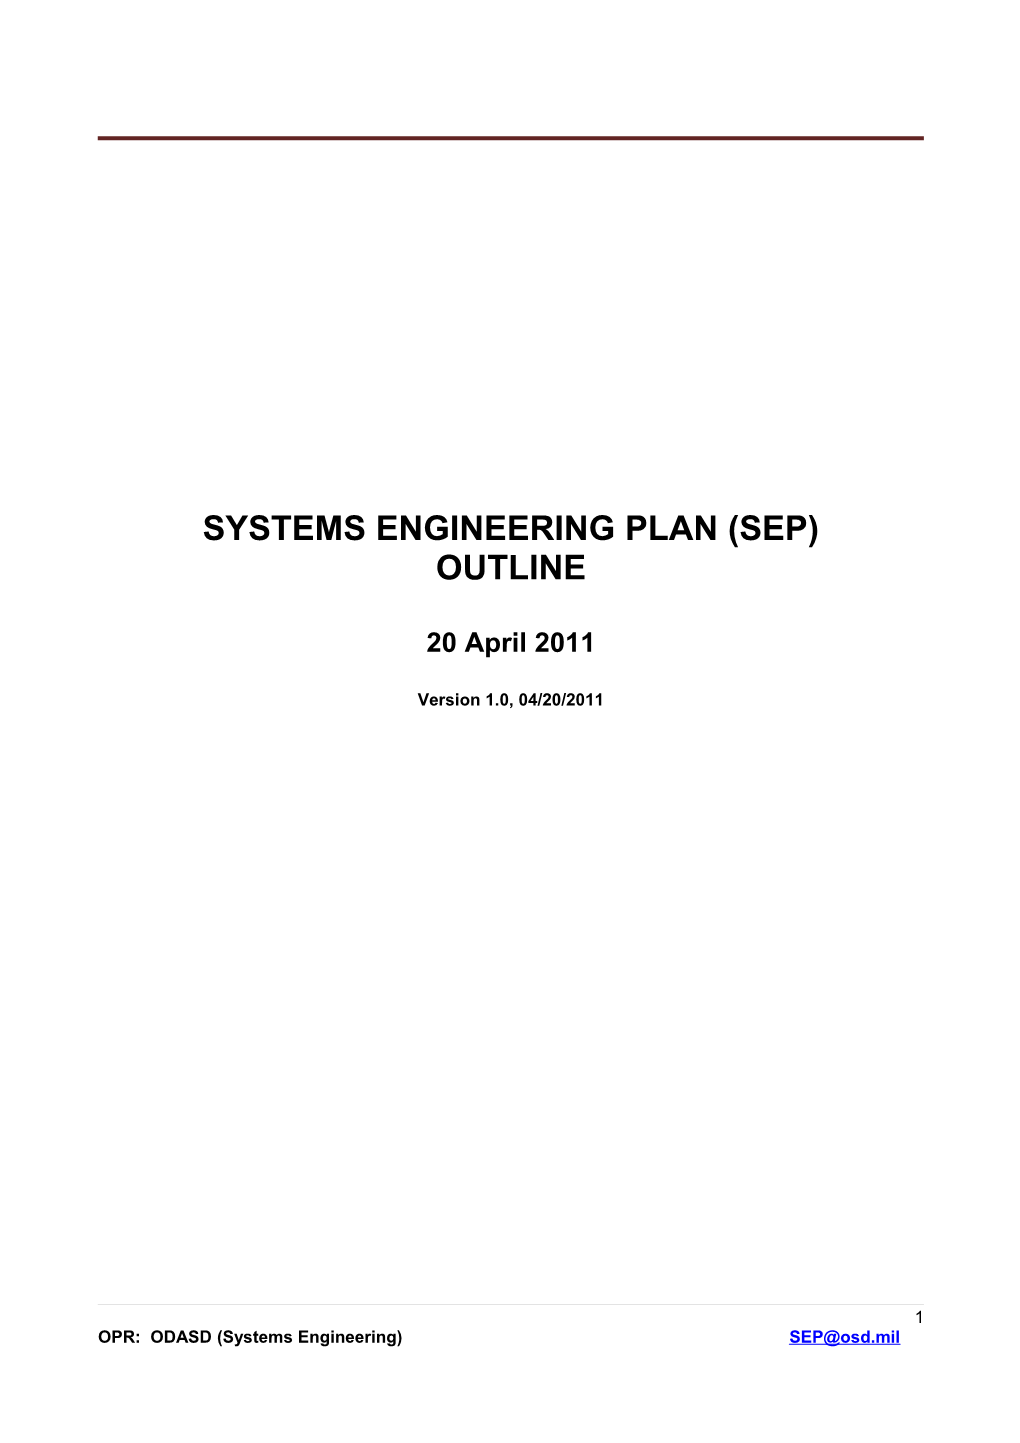 Systems Engineering Plan (Sep)